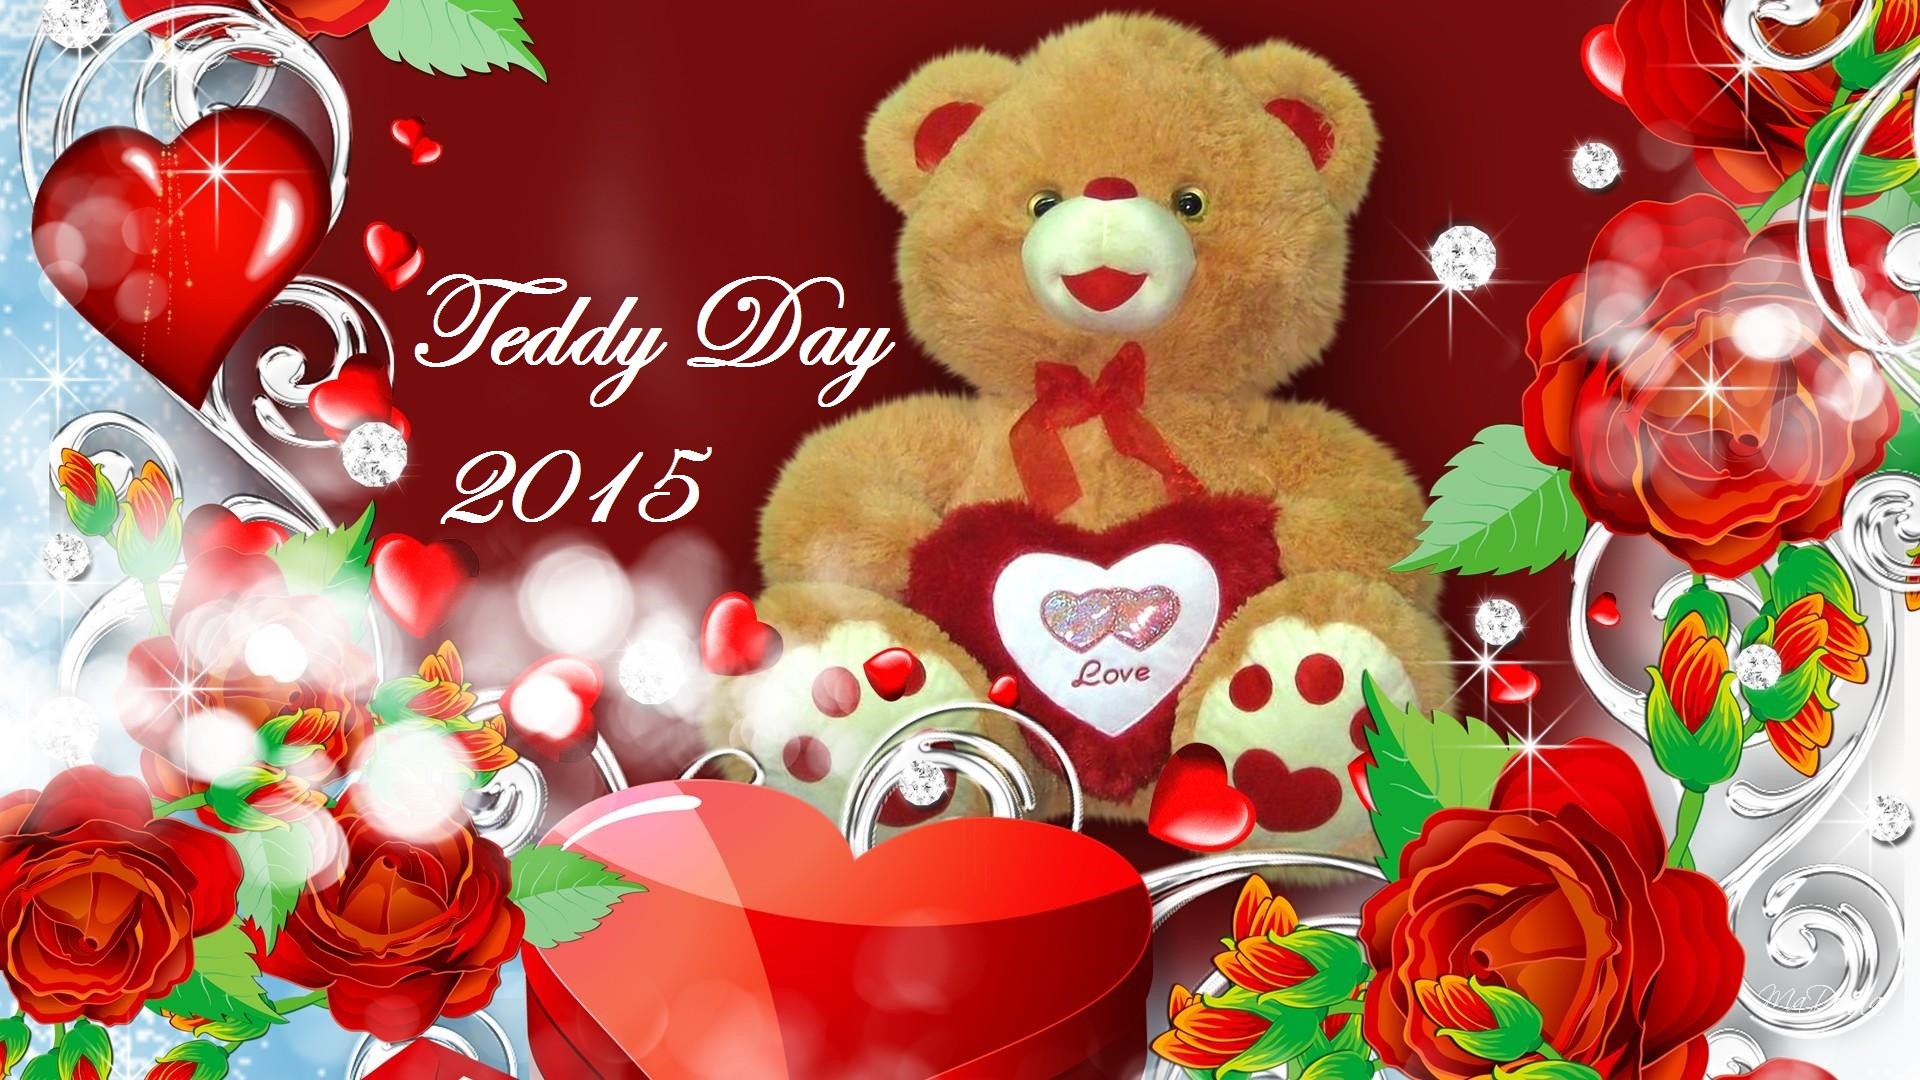 Happy Teddy Day Cute Teddy Bear Images Hd Wallpapers For Facebook Covers Whatsapp Dp 1920x1080